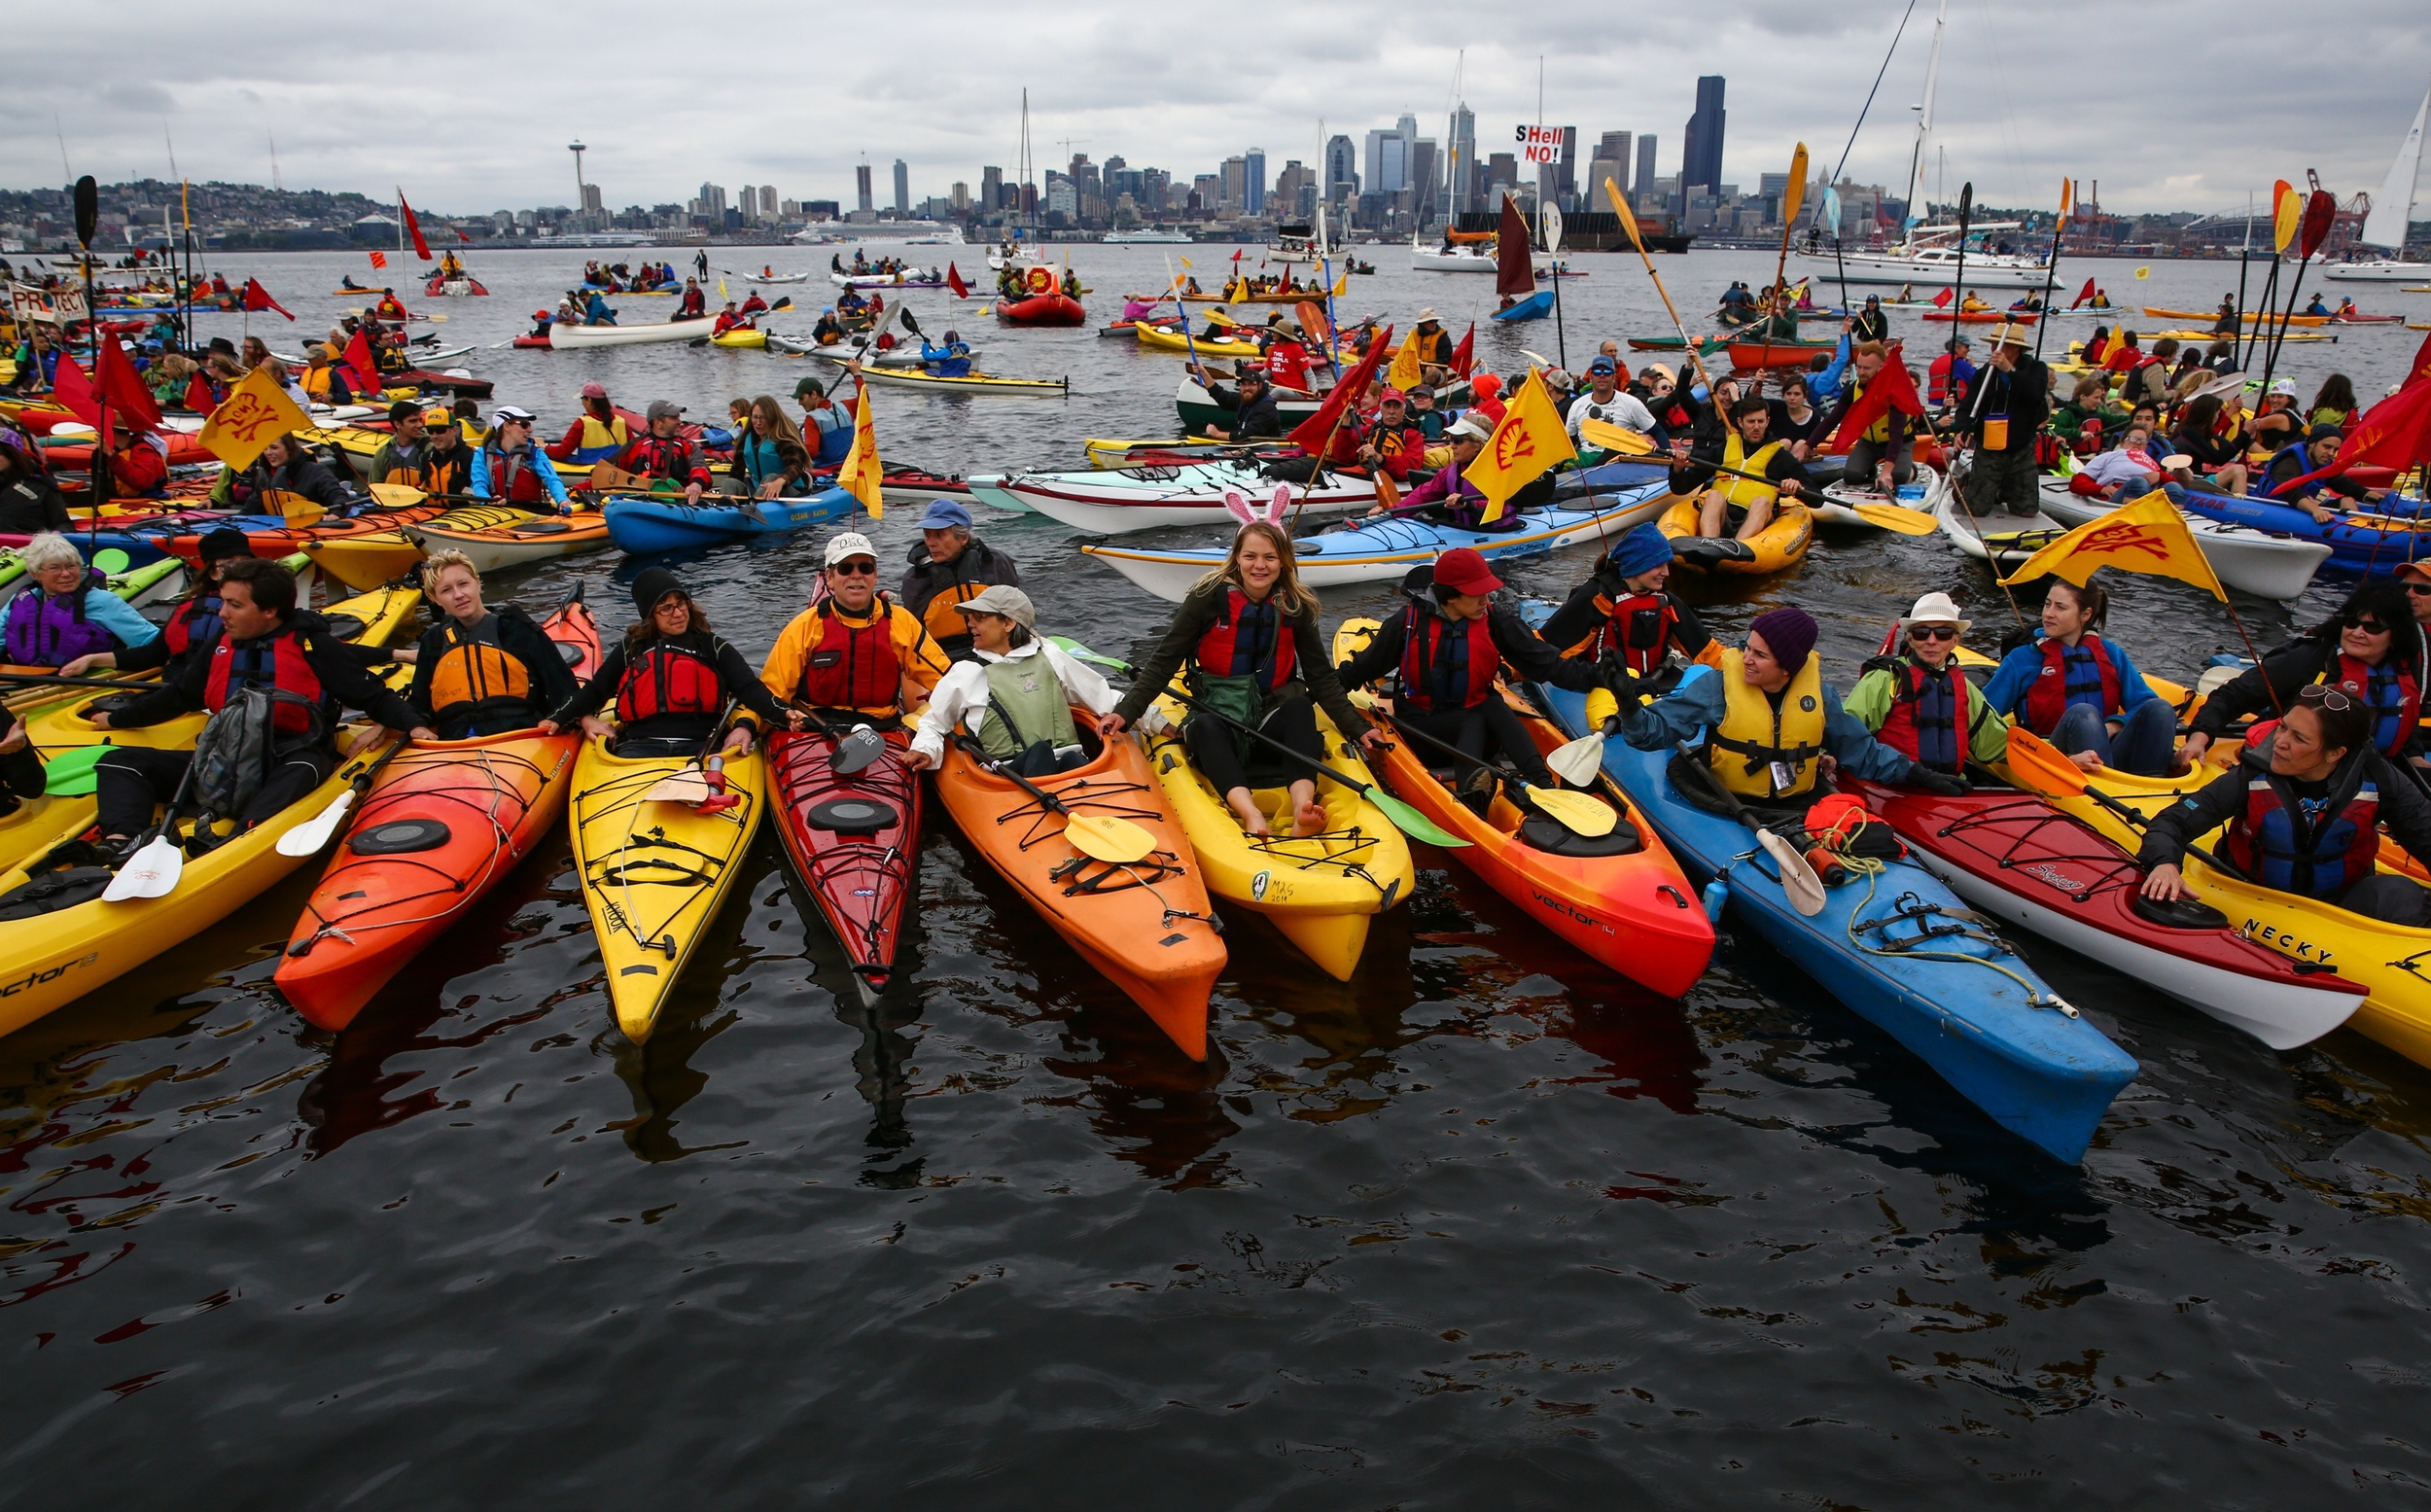   Hundreds of kayaktivists take to the water during protest against drilling in the Arctic and the Port of Seattle being used as a port for the Shell Oil drilling rig Polar Pioneer. Photographed on Saturday, May 16, 2015.  